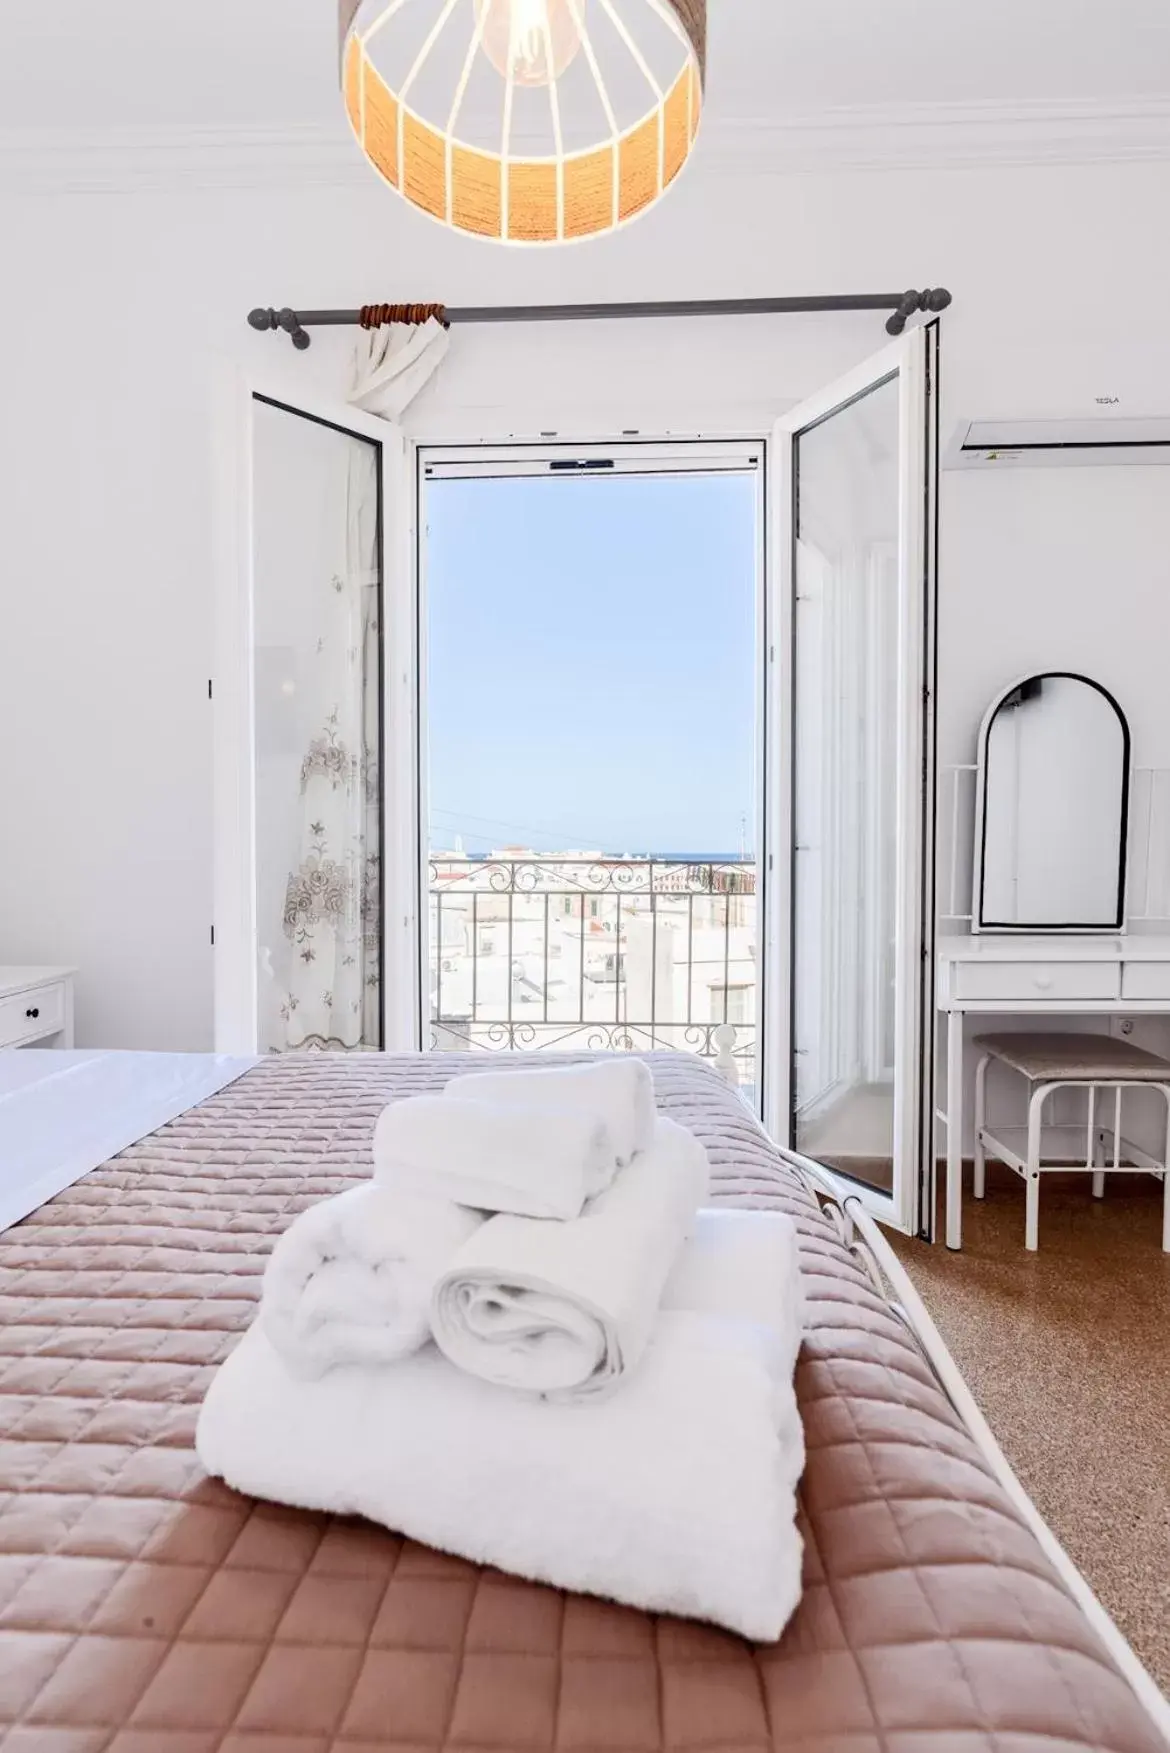 Syros DouBleTS rooms